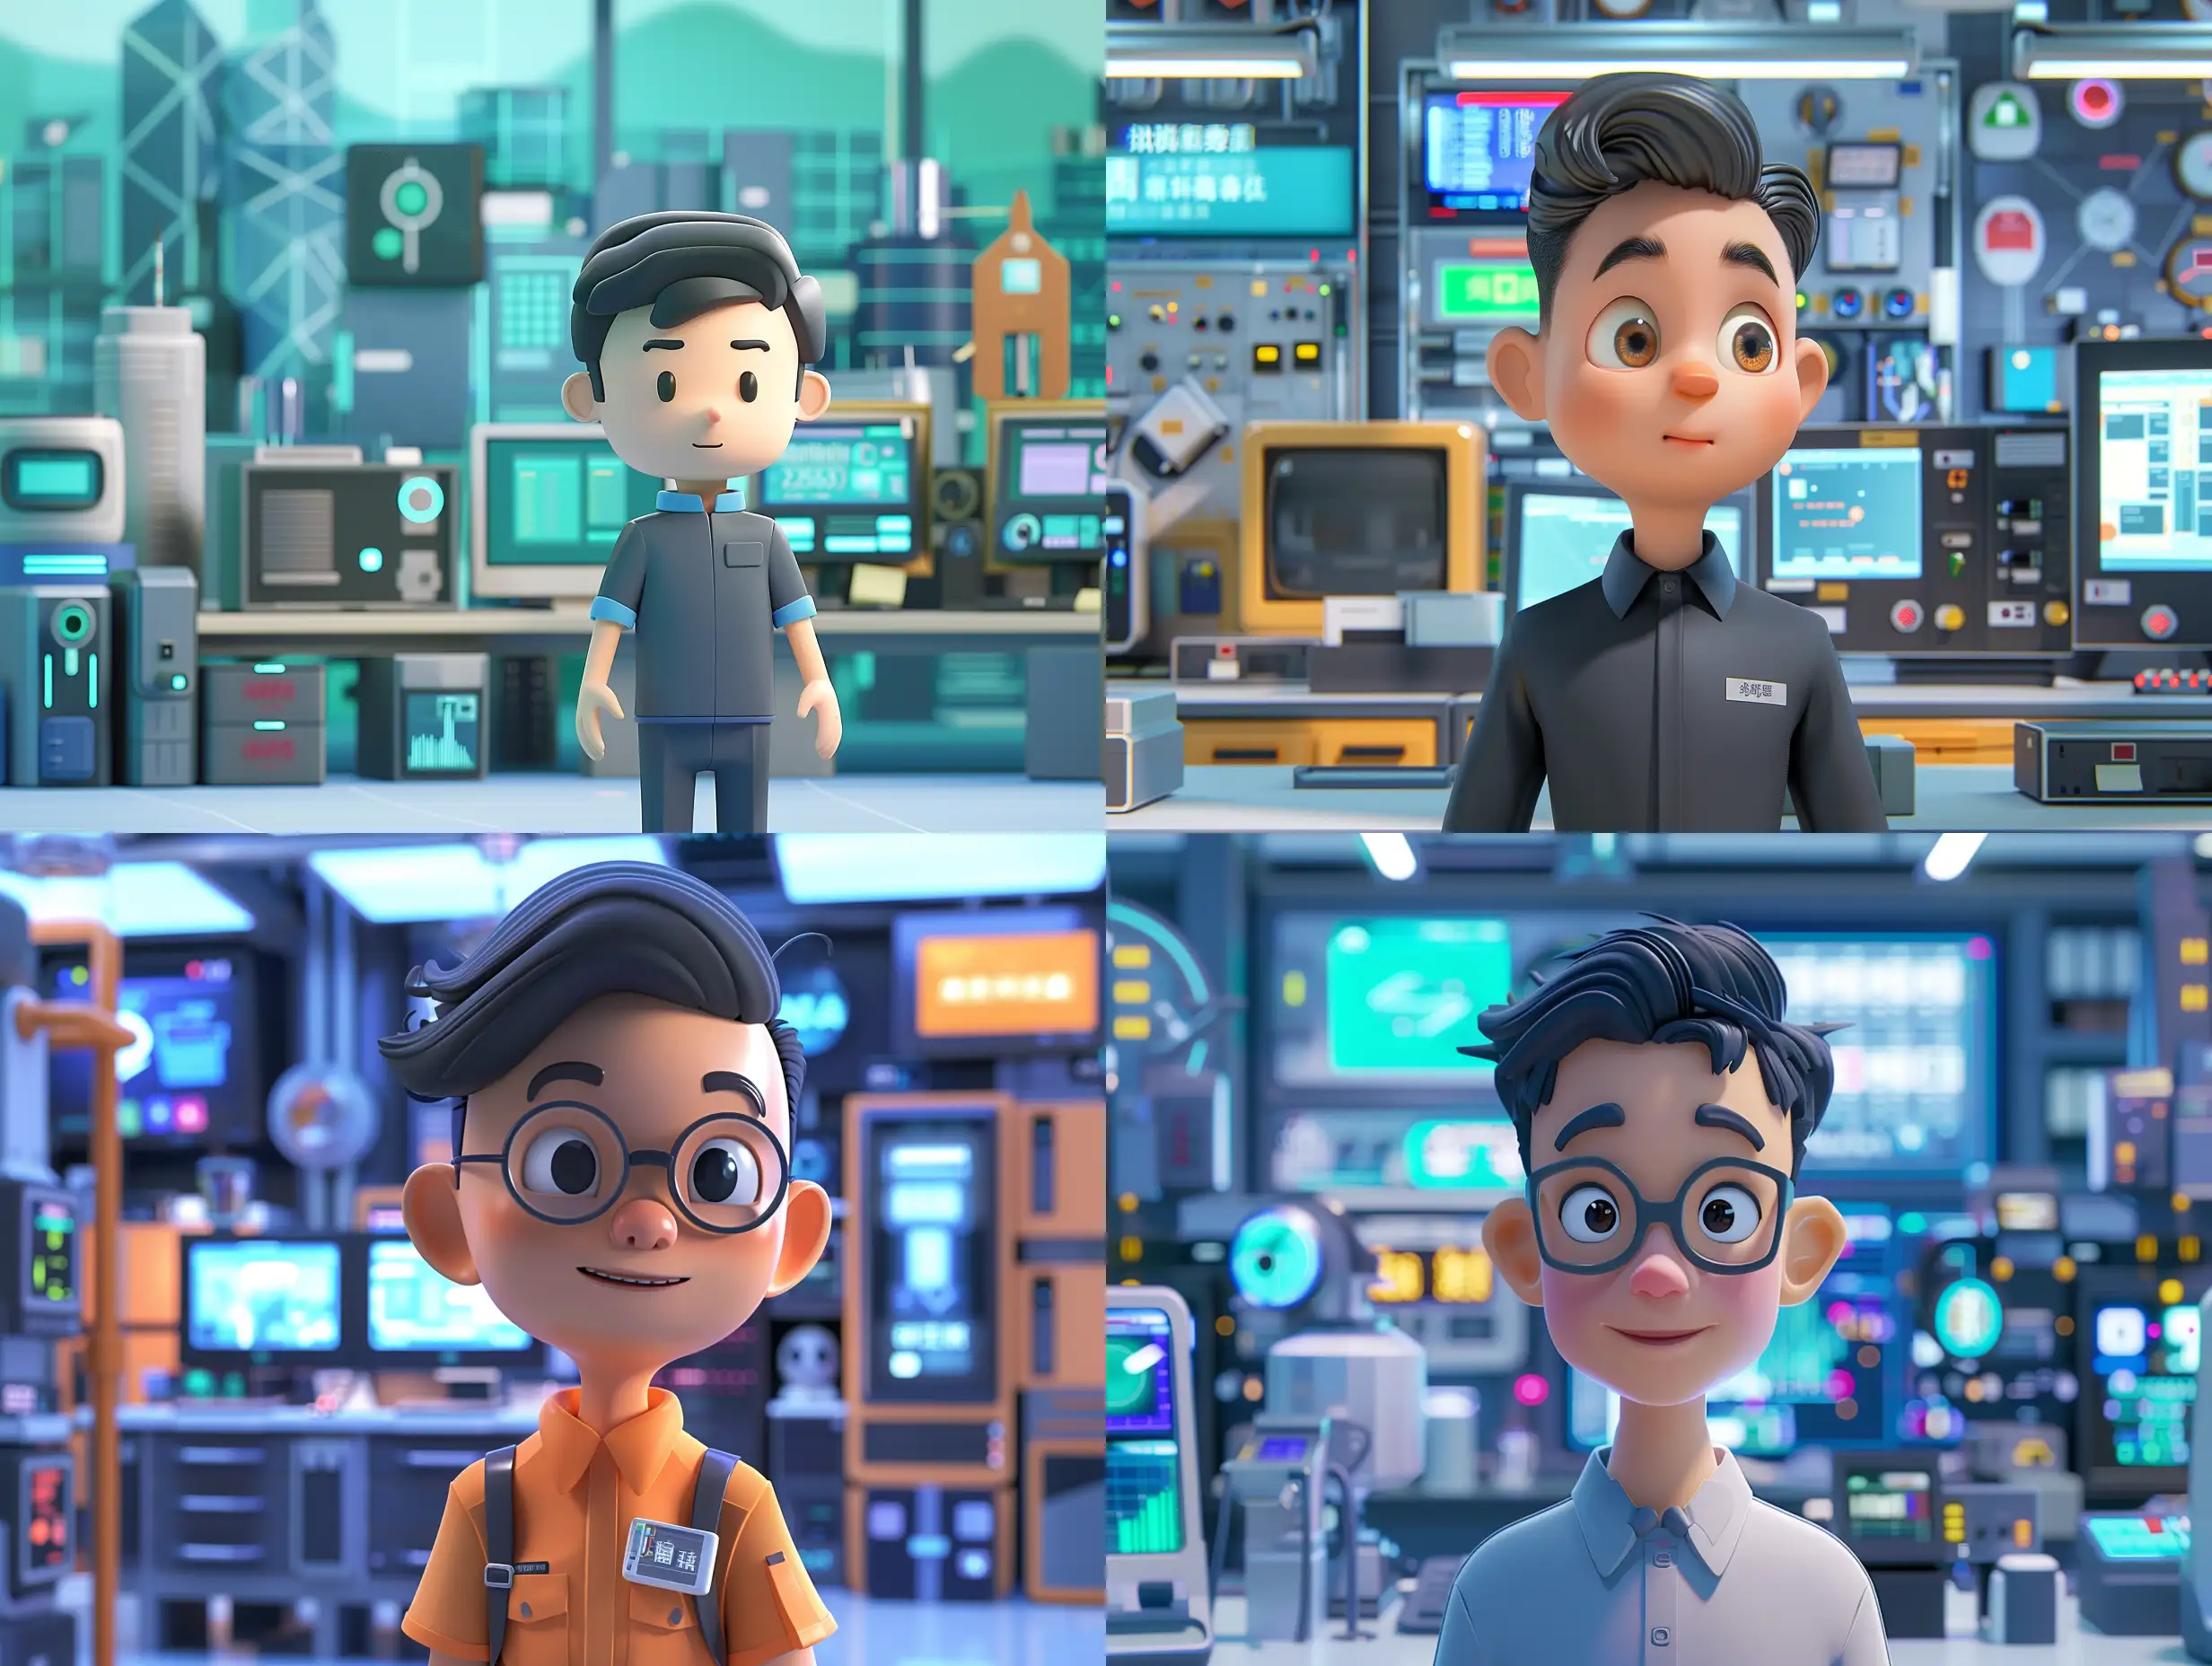 Create a 3D animated character of an IT expert in a technology-driven office environment in Hong Kong, with detailed cartoon-like features and human-like proportions. The character should have a smart and approachable expression, surrounded by modern tech equipment and digital screens. The overall color scheme should feature shades close to #2563eb, providing a cohesive and vibrant backdrop that complements the bustling tech scene.